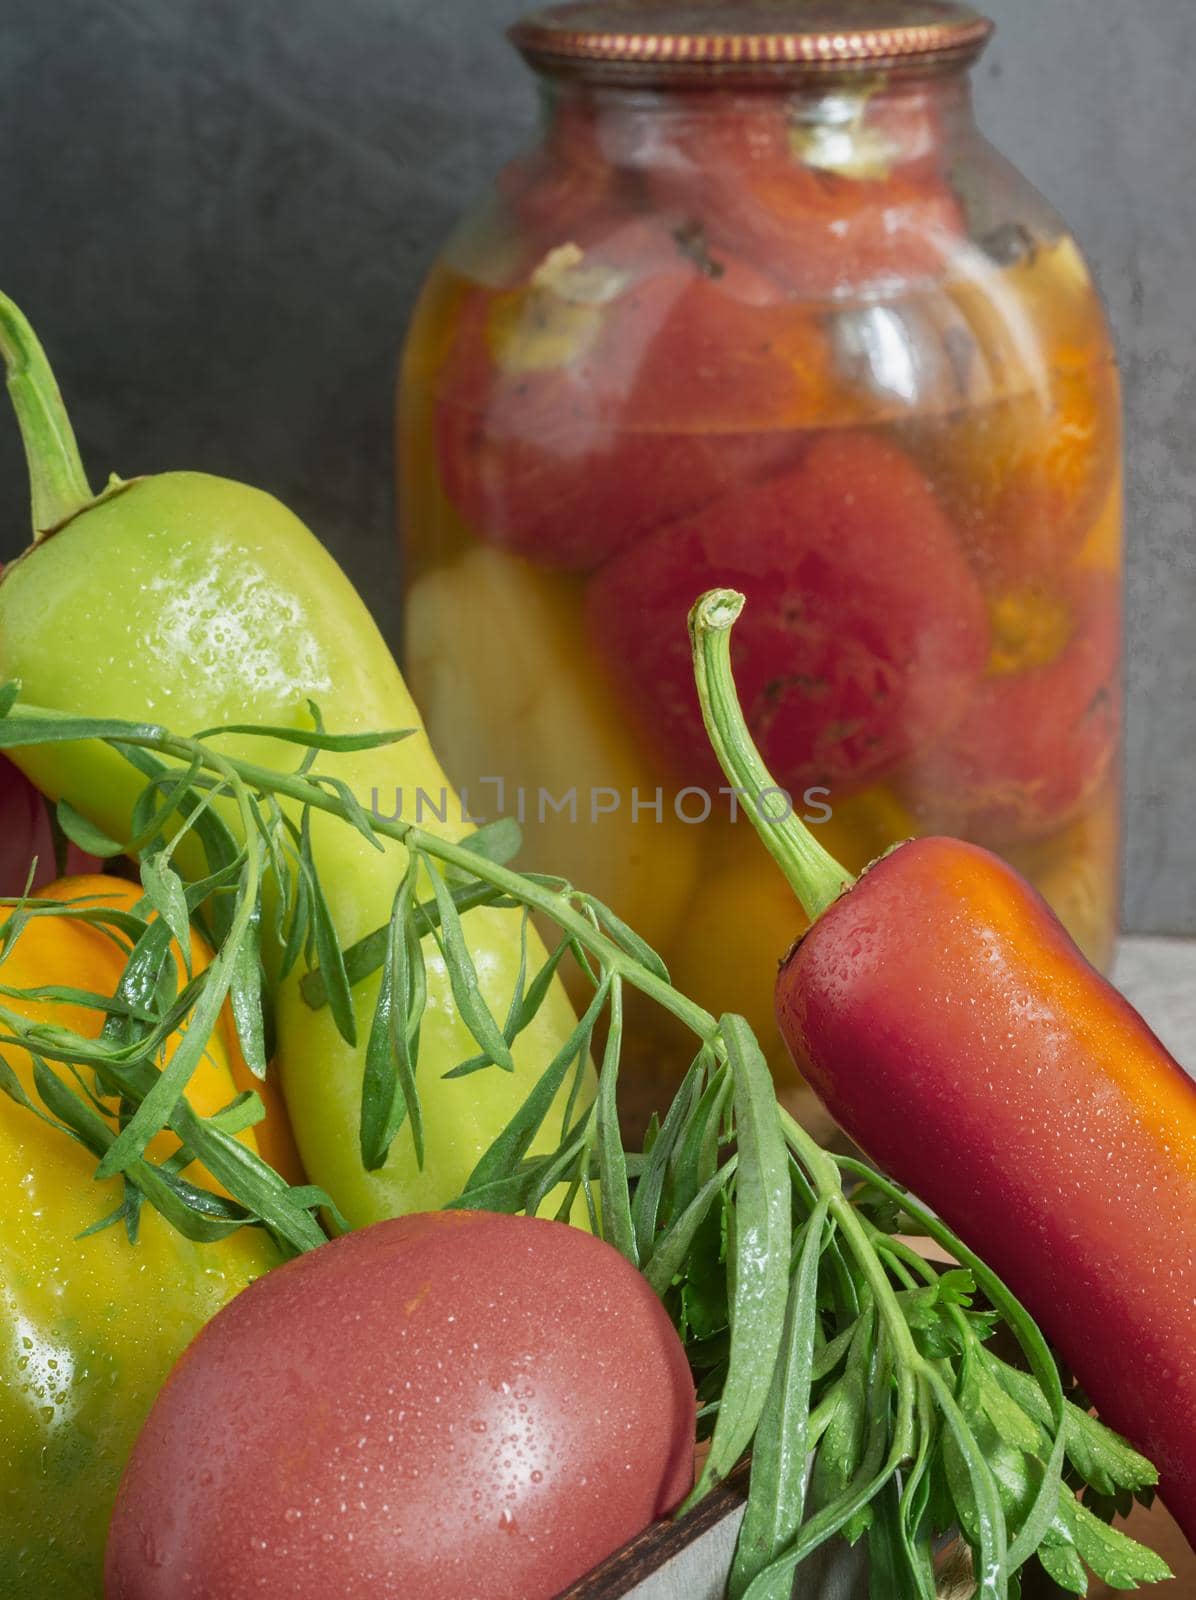 In glass jars, canned bell peppers, next to a box of peppers and other vegetables. Front view, close-up